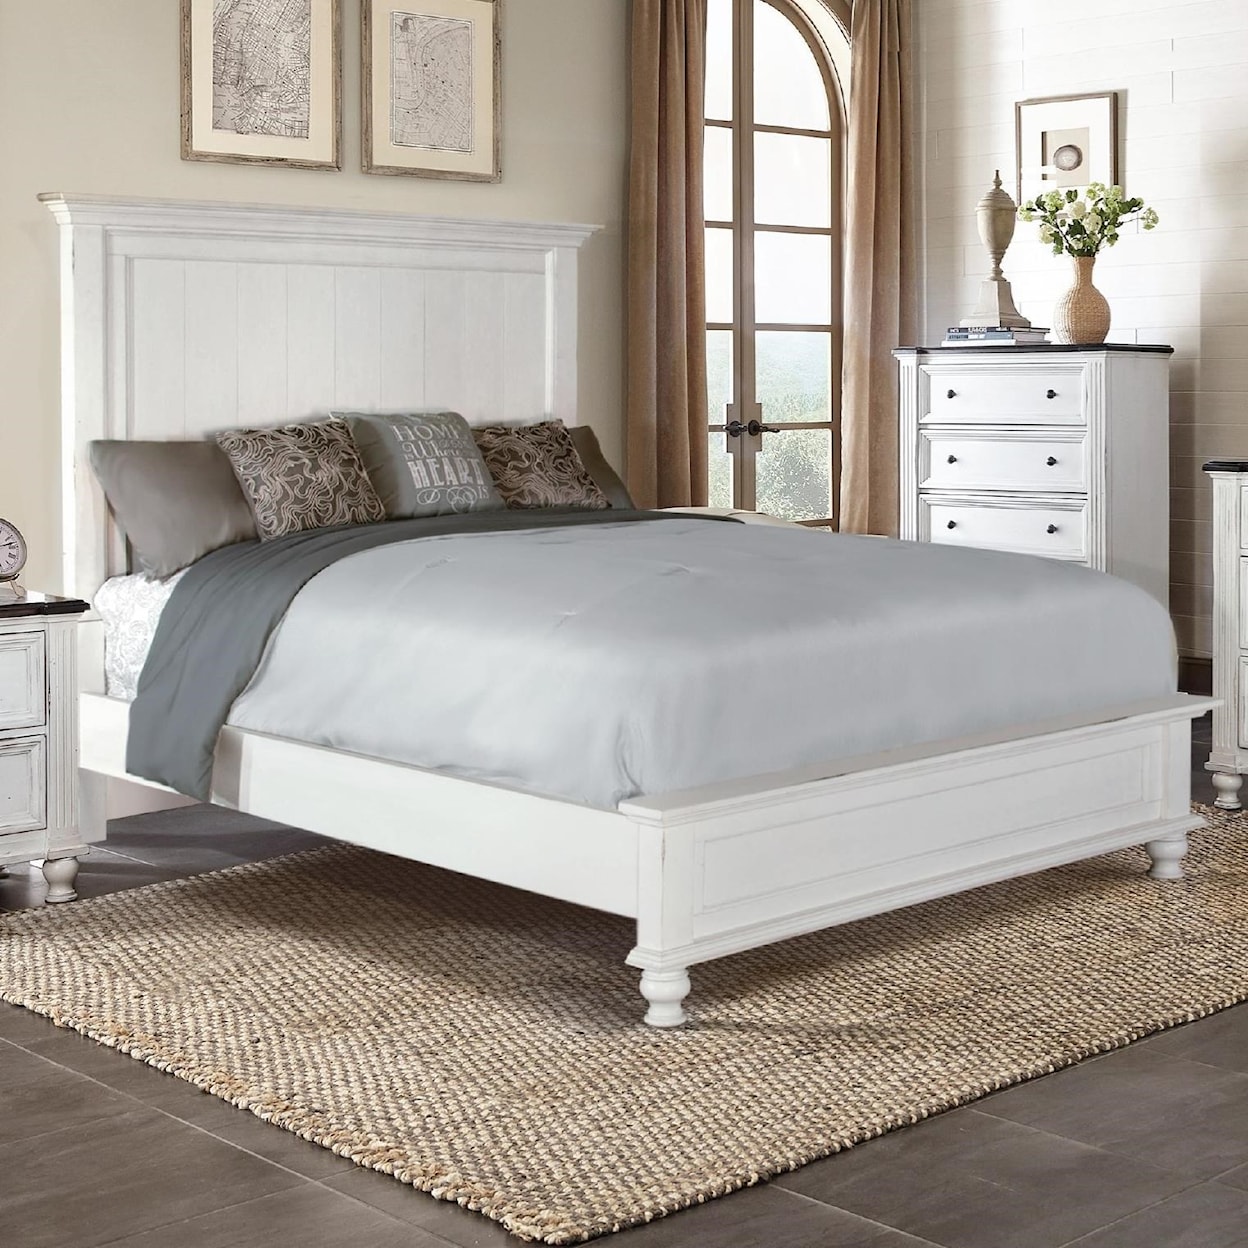 Sunny Designs Carriage House King Platform Bed